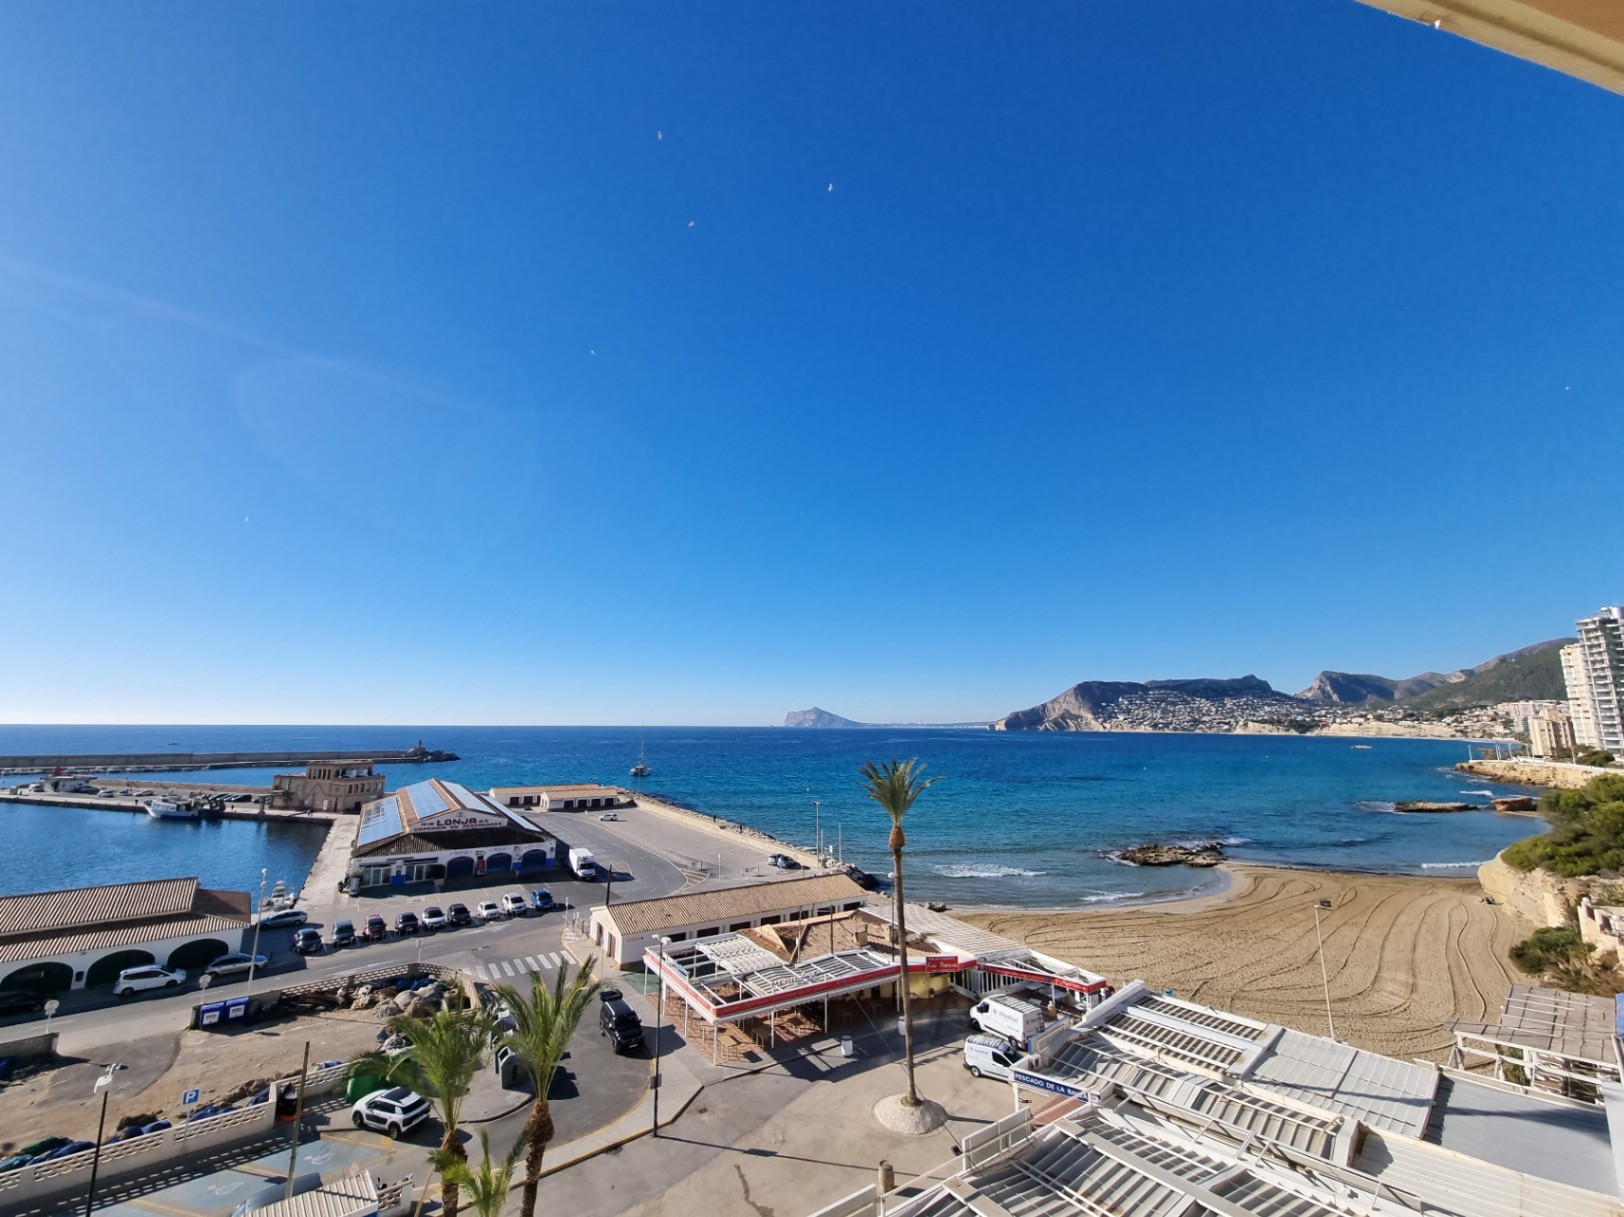 Splendid Frontline Apartment: Exceptional Views of the Port of Calpe